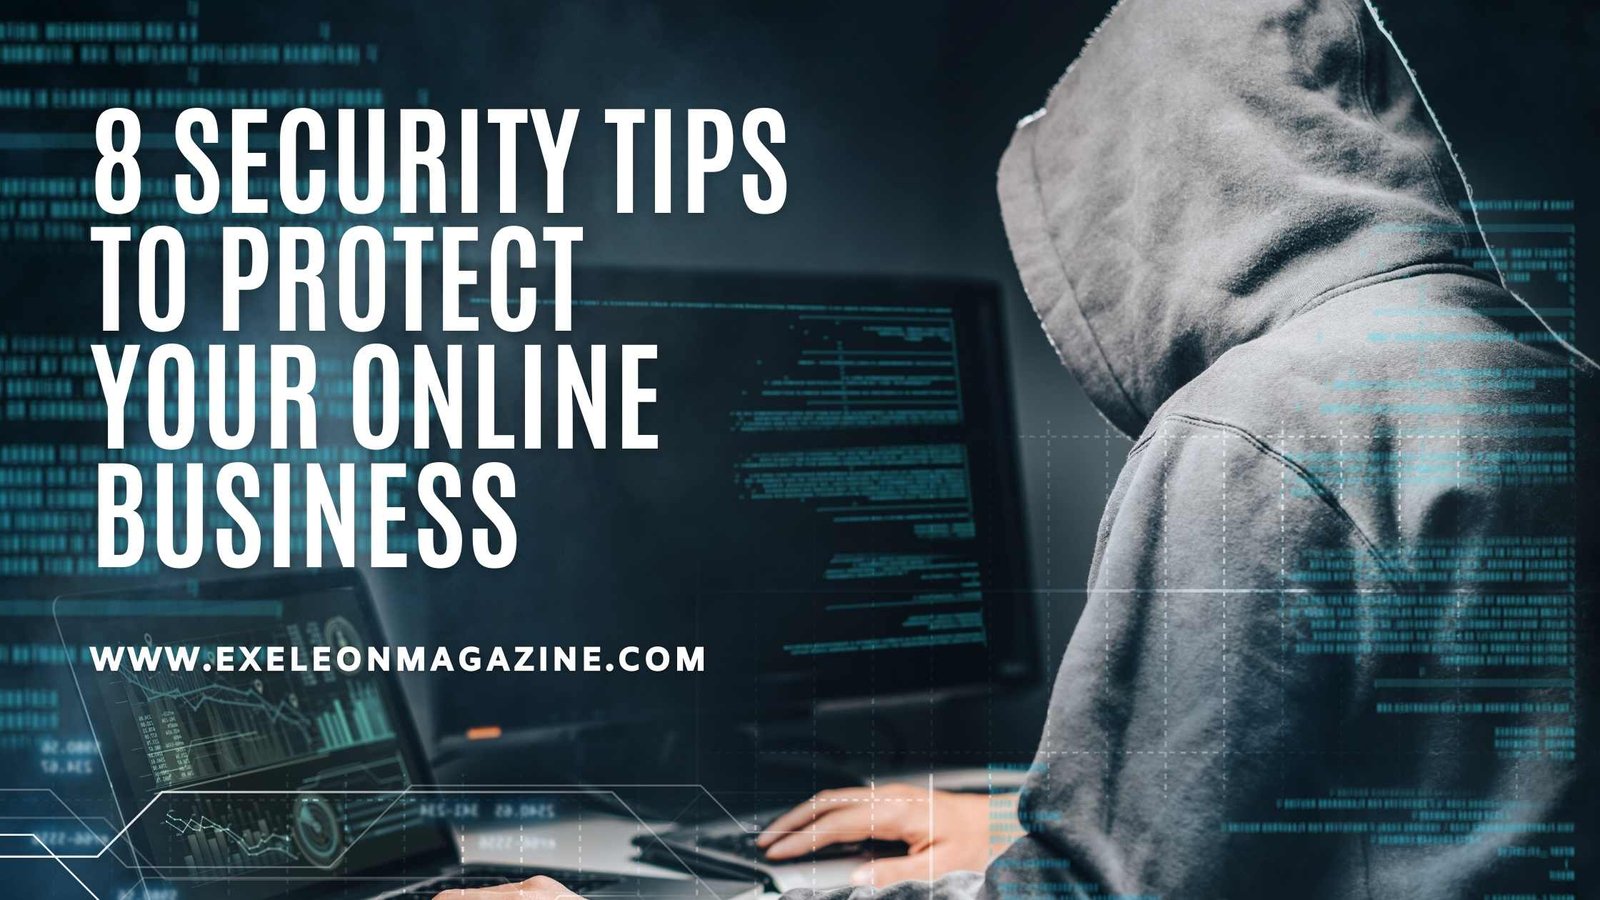 Protect your Online Business